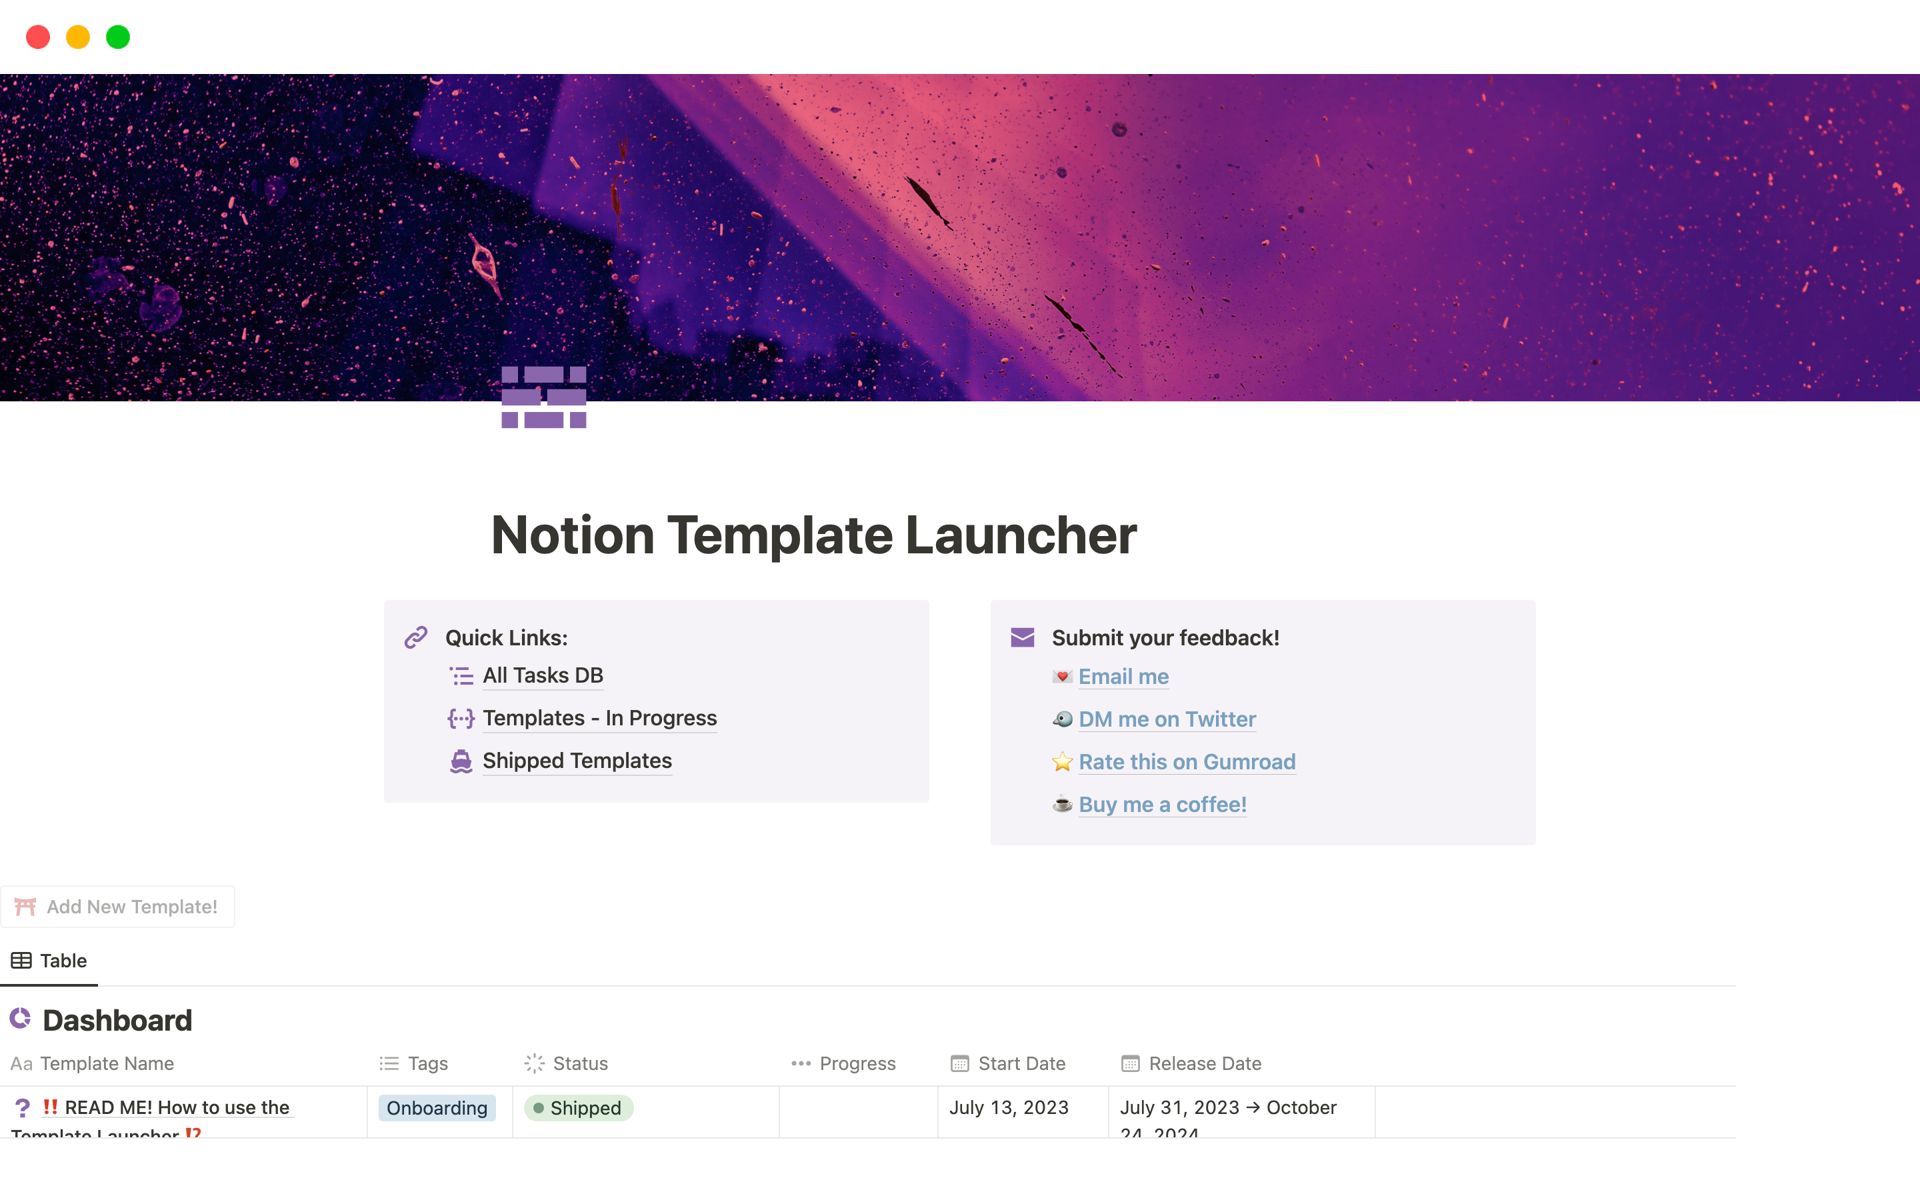 A template preview for Notion Template Launcher